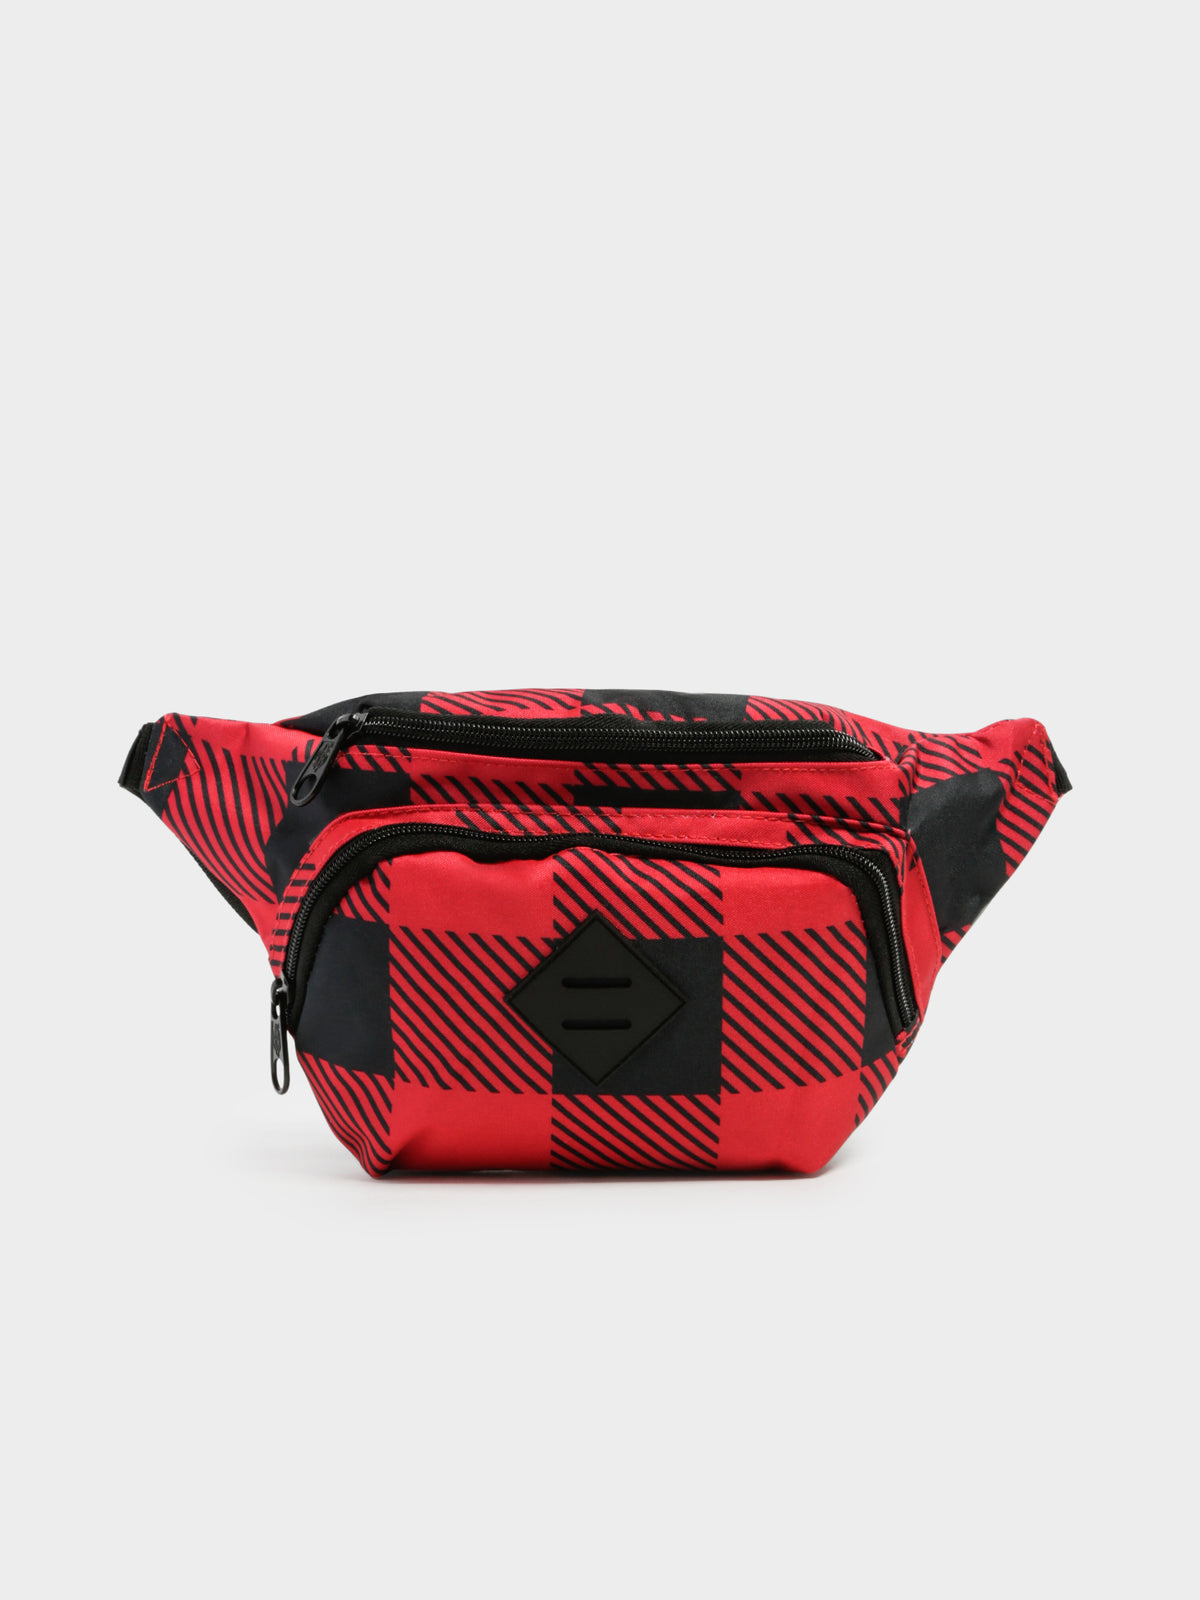 Hip Sack in Red Buffalo Check